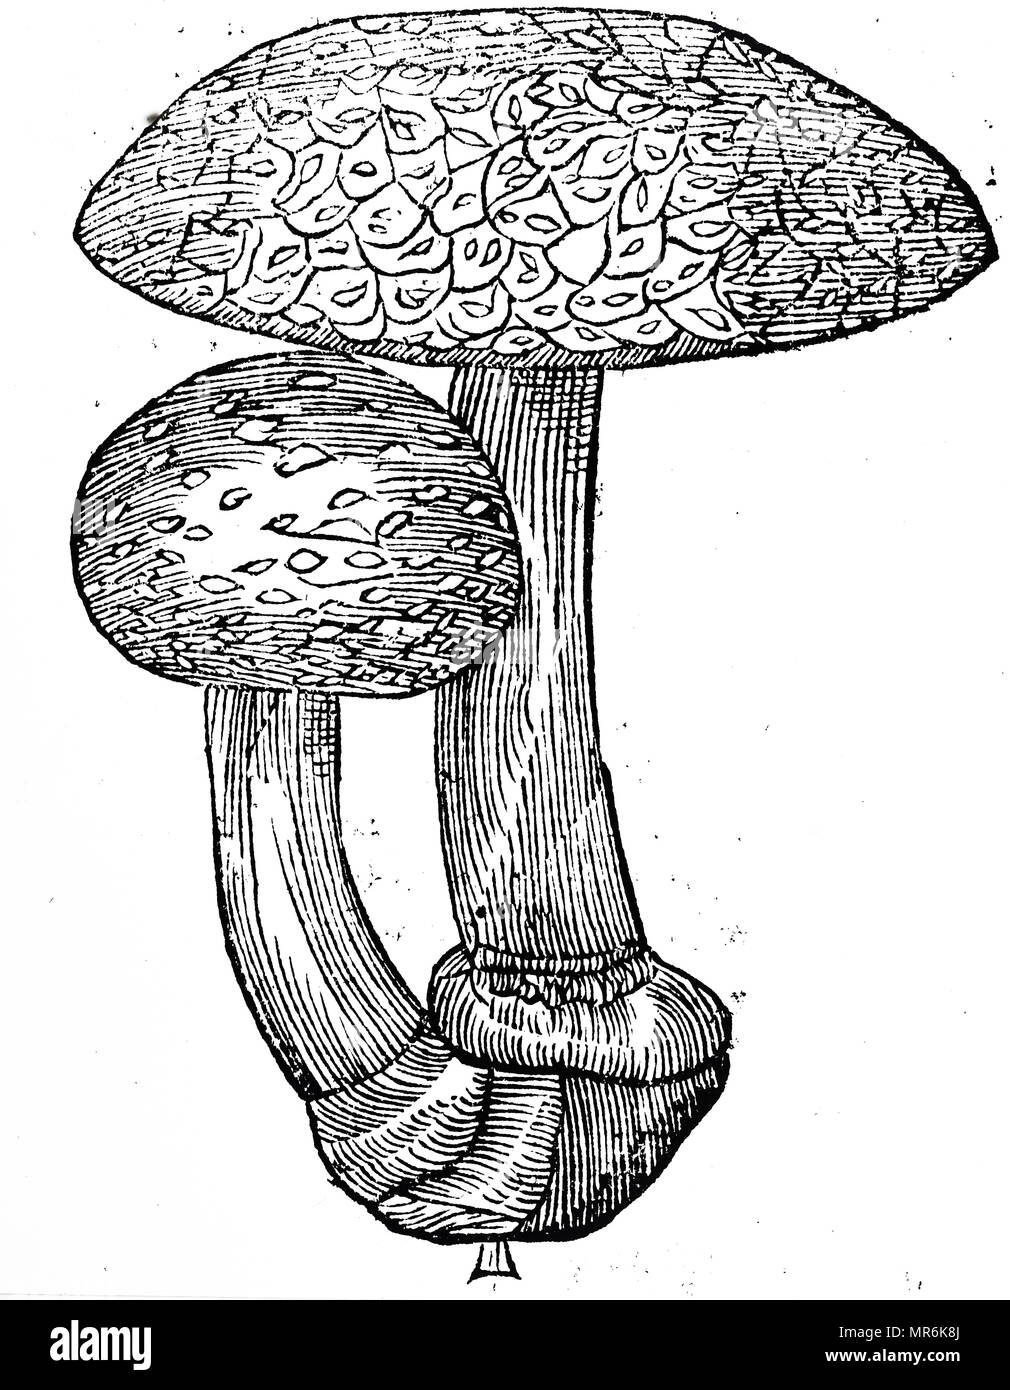 Engraving depicting a Amanita Muscaria (Fly Agaric), a basidiomycete mushroom. Dated 17th century Stock Photo